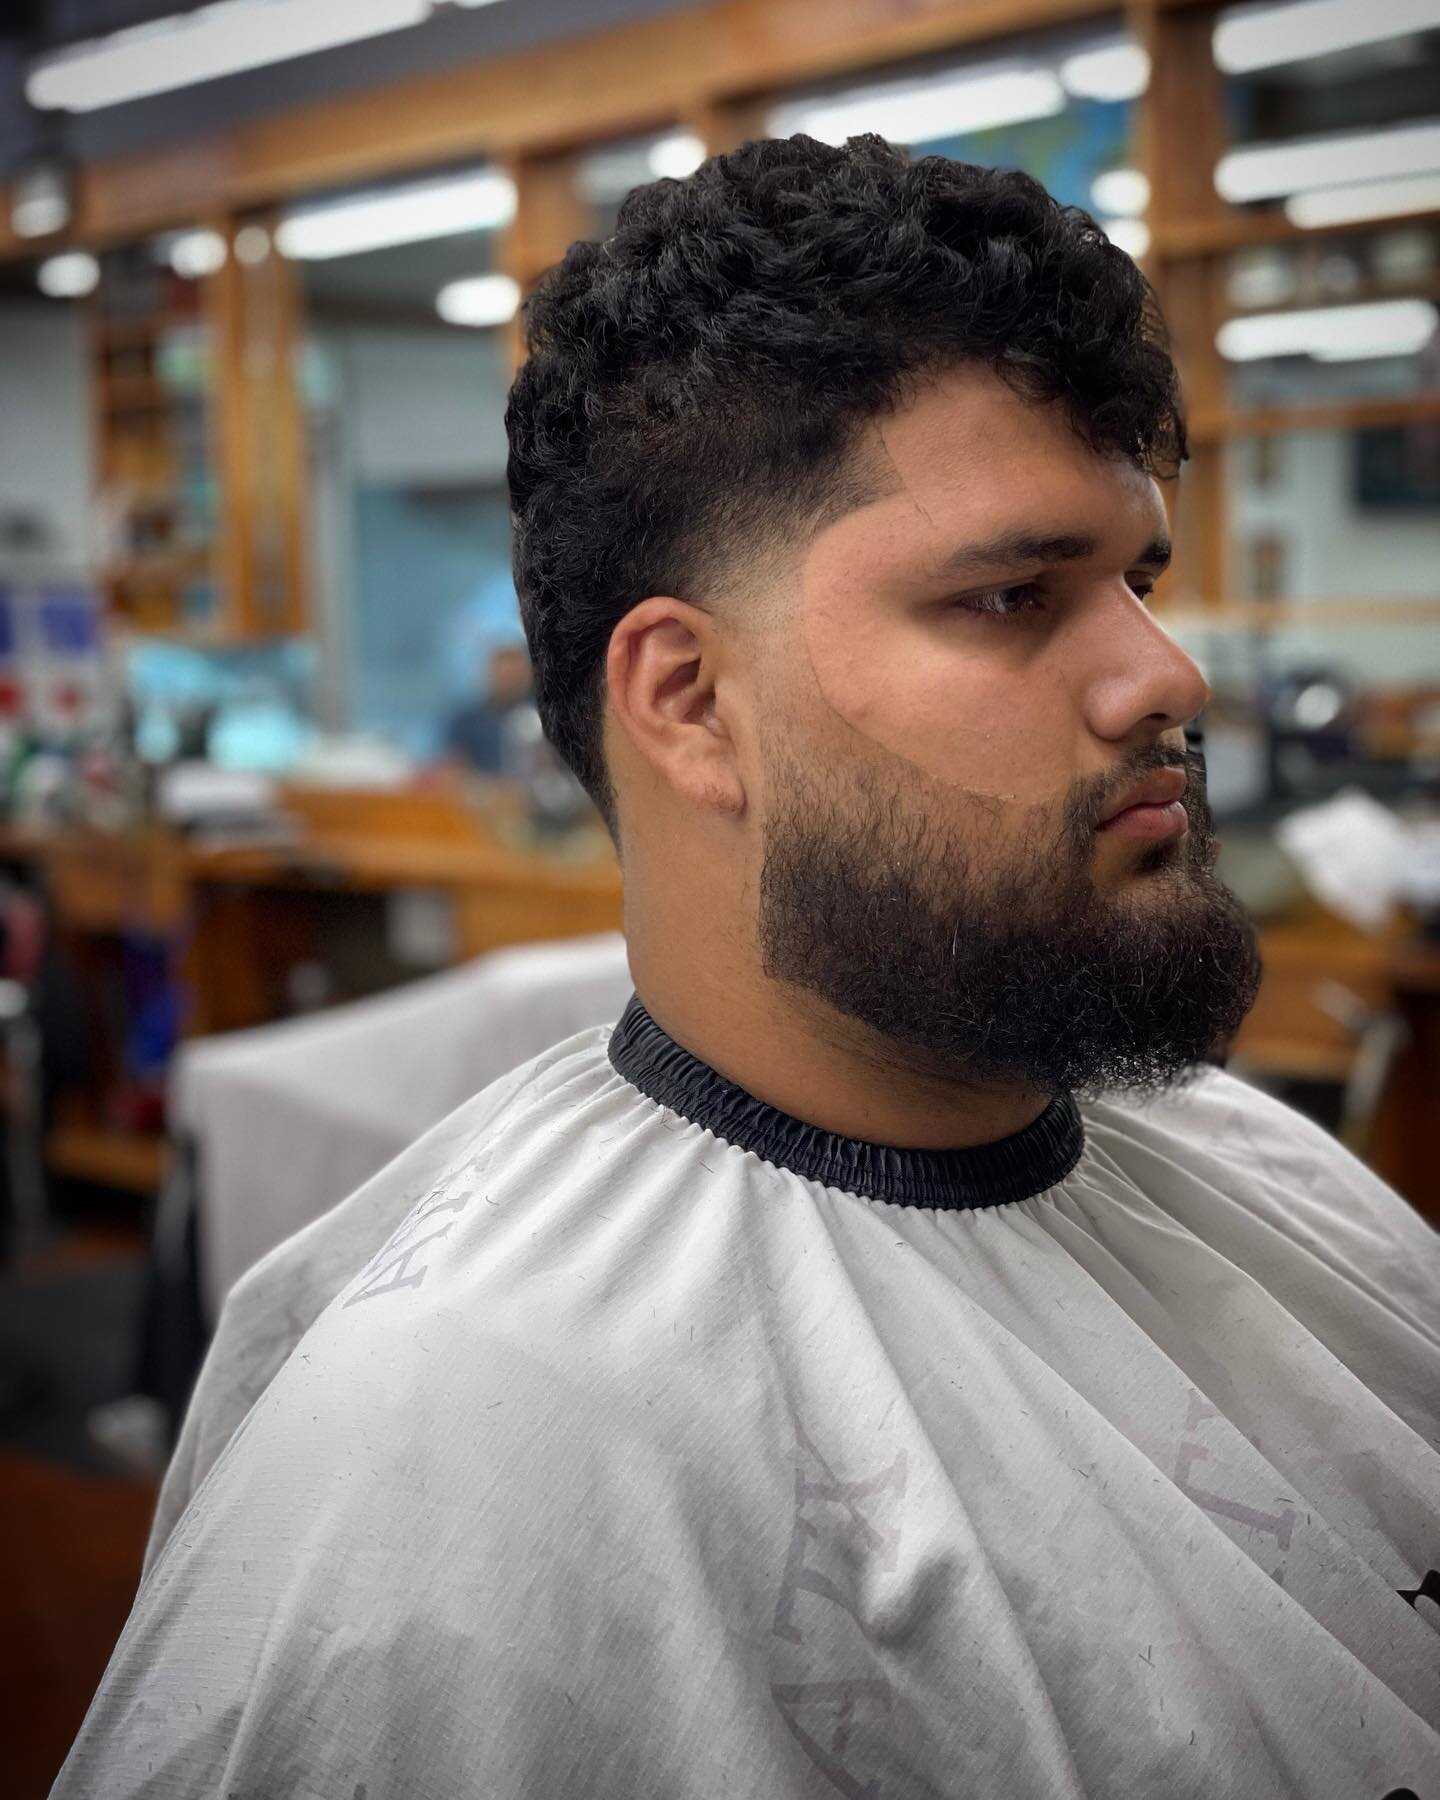 Book now ! Transformation! Swipe ⬅️
&bull;
&bull;
&bull;
#midfade #fadedbeard #wahl #wahlclippers #wahldetailers #astrablades #blendedfades #halfbarberxhalfamazing #haircutdesigns hairstyles #cleancuts #blessedfades #barberlifestyle #southaustinbarbe